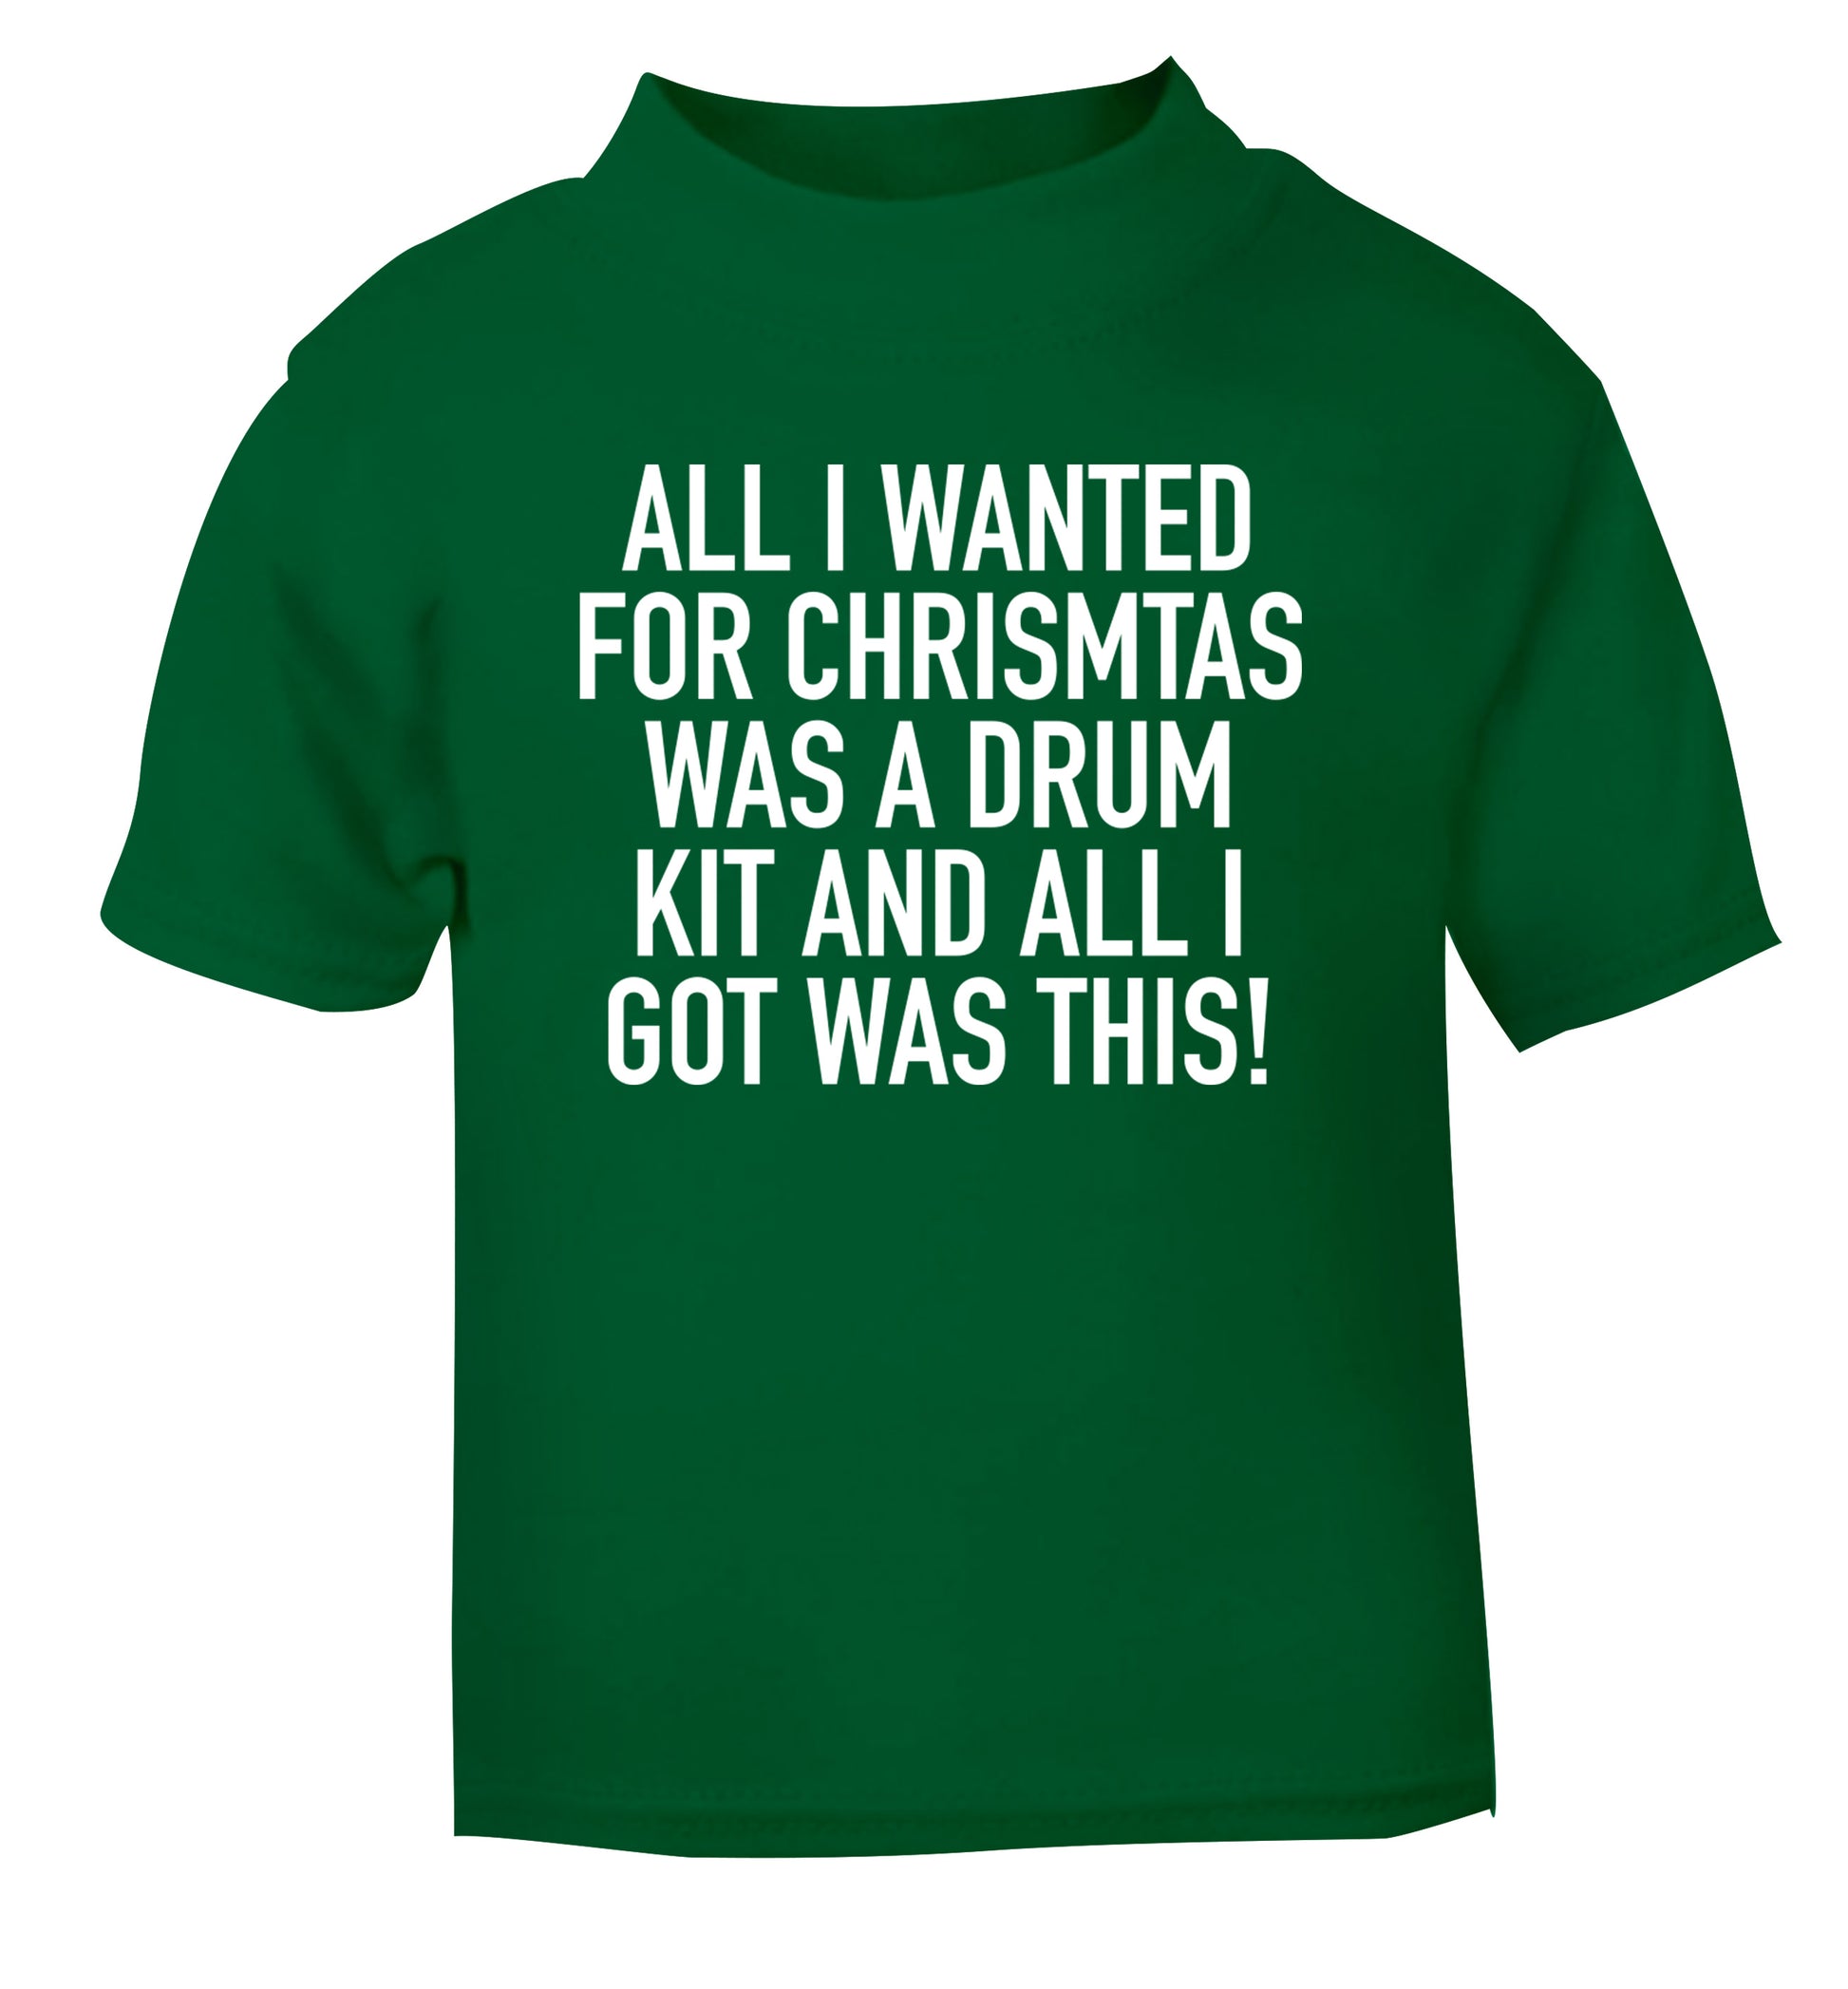 All I wanted for Christmas was a drum kit and all I got was this! green Baby Toddler Tshirt 2 Years